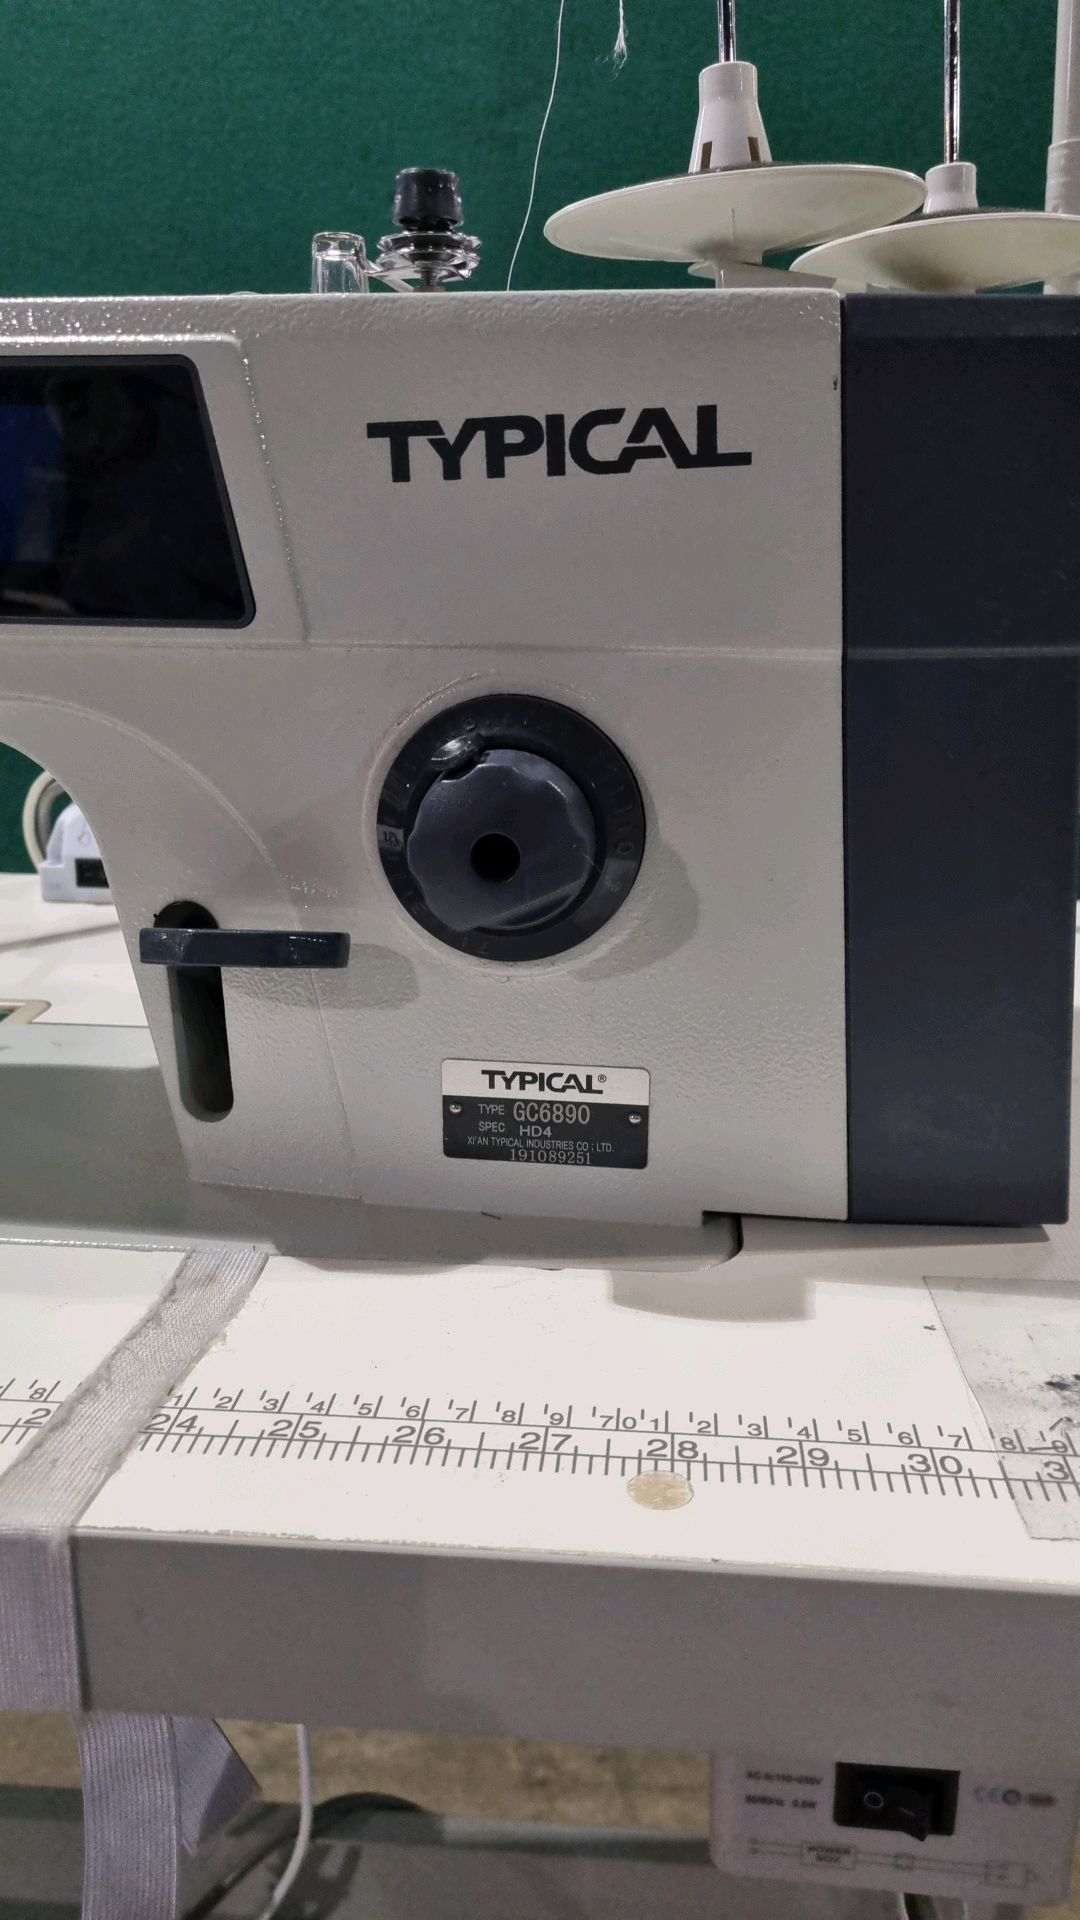 Typical Electric Lockstitch Sewing Machine | GC6890 - Image 2 of 5